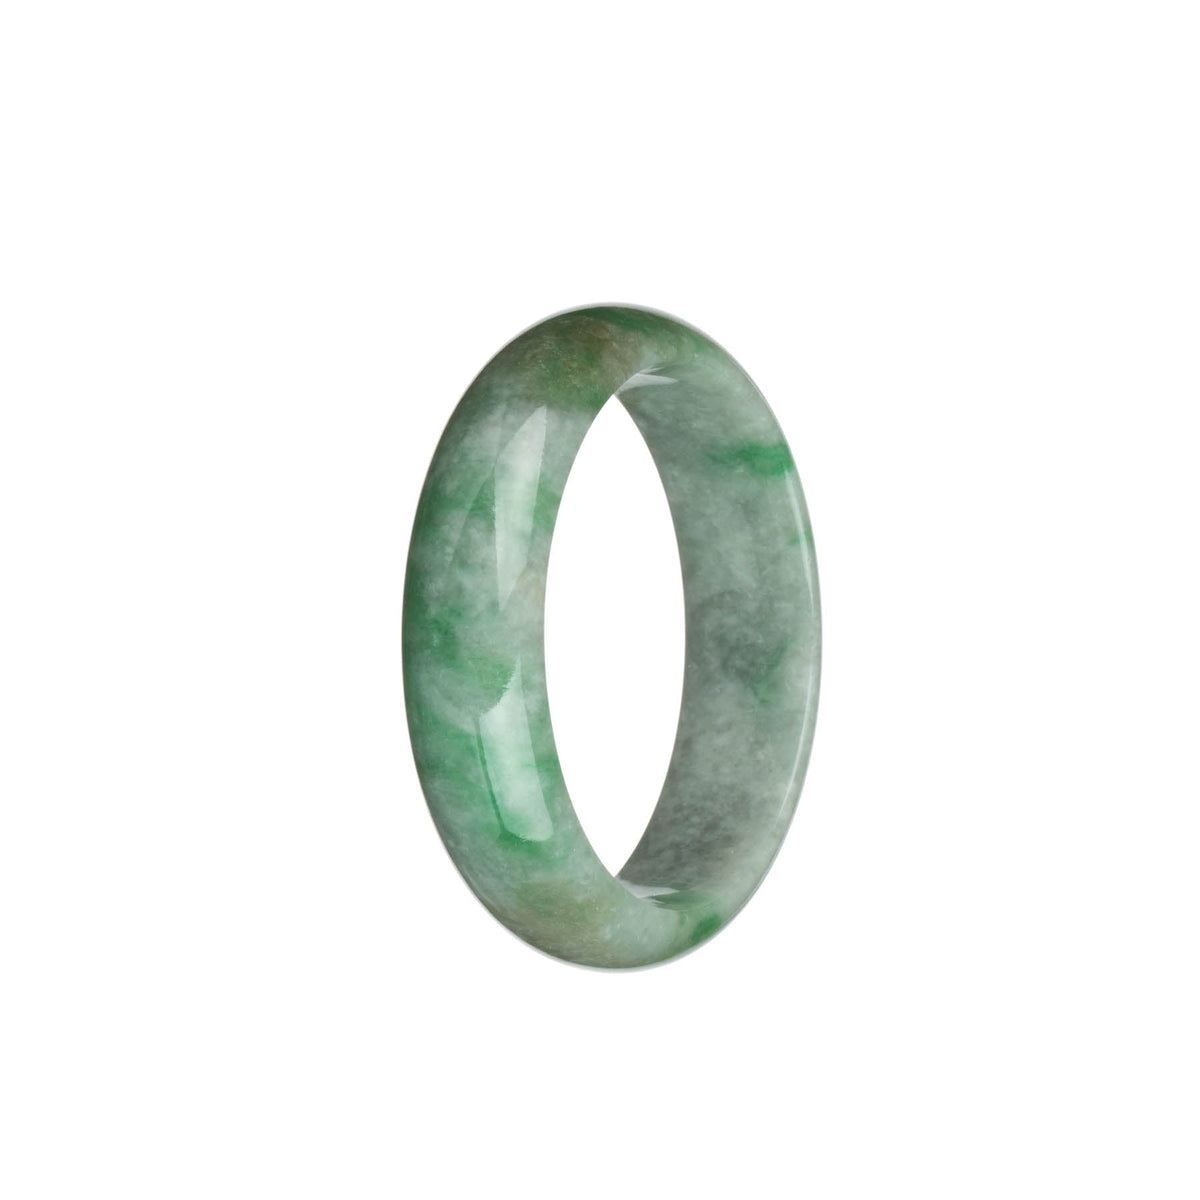 A beautiful jade bangle bracelet featuring natural light grey color with emerald green patterns and light brown patches, showcasing a traditional design. The bangle has a half moon shape and measures 51mm in size. Crafted by MAYS GEMS.